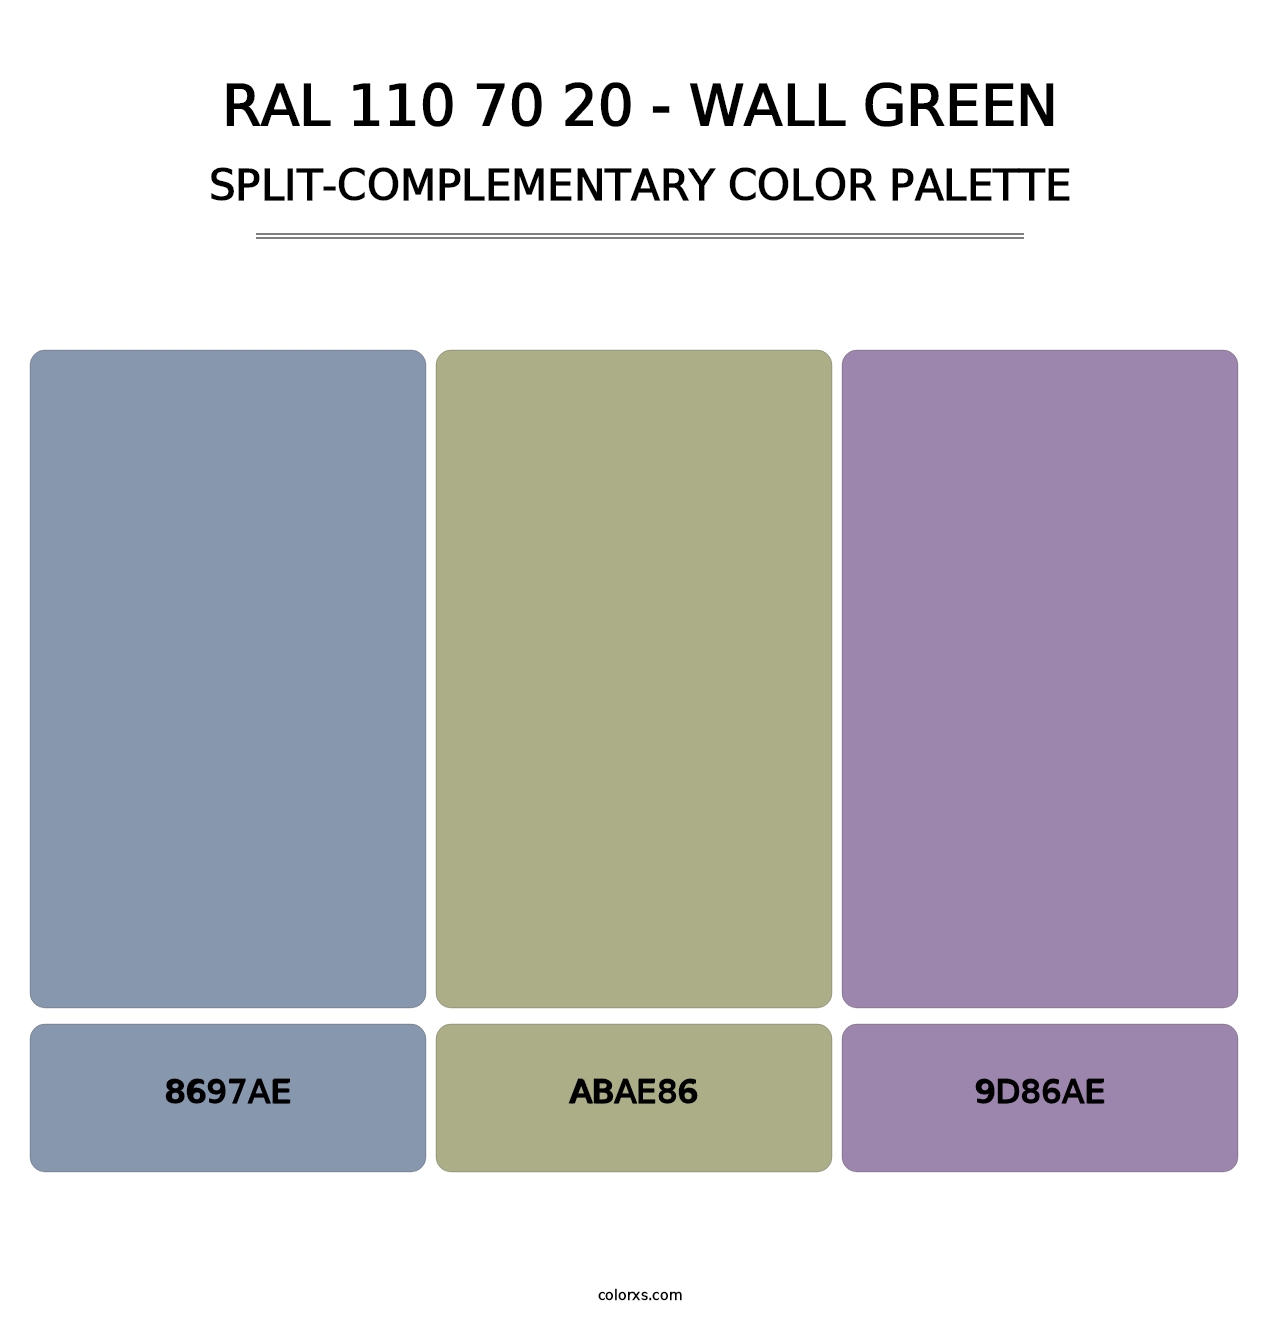 RAL 110 70 20 - Wall Green - Split-Complementary Color Palette